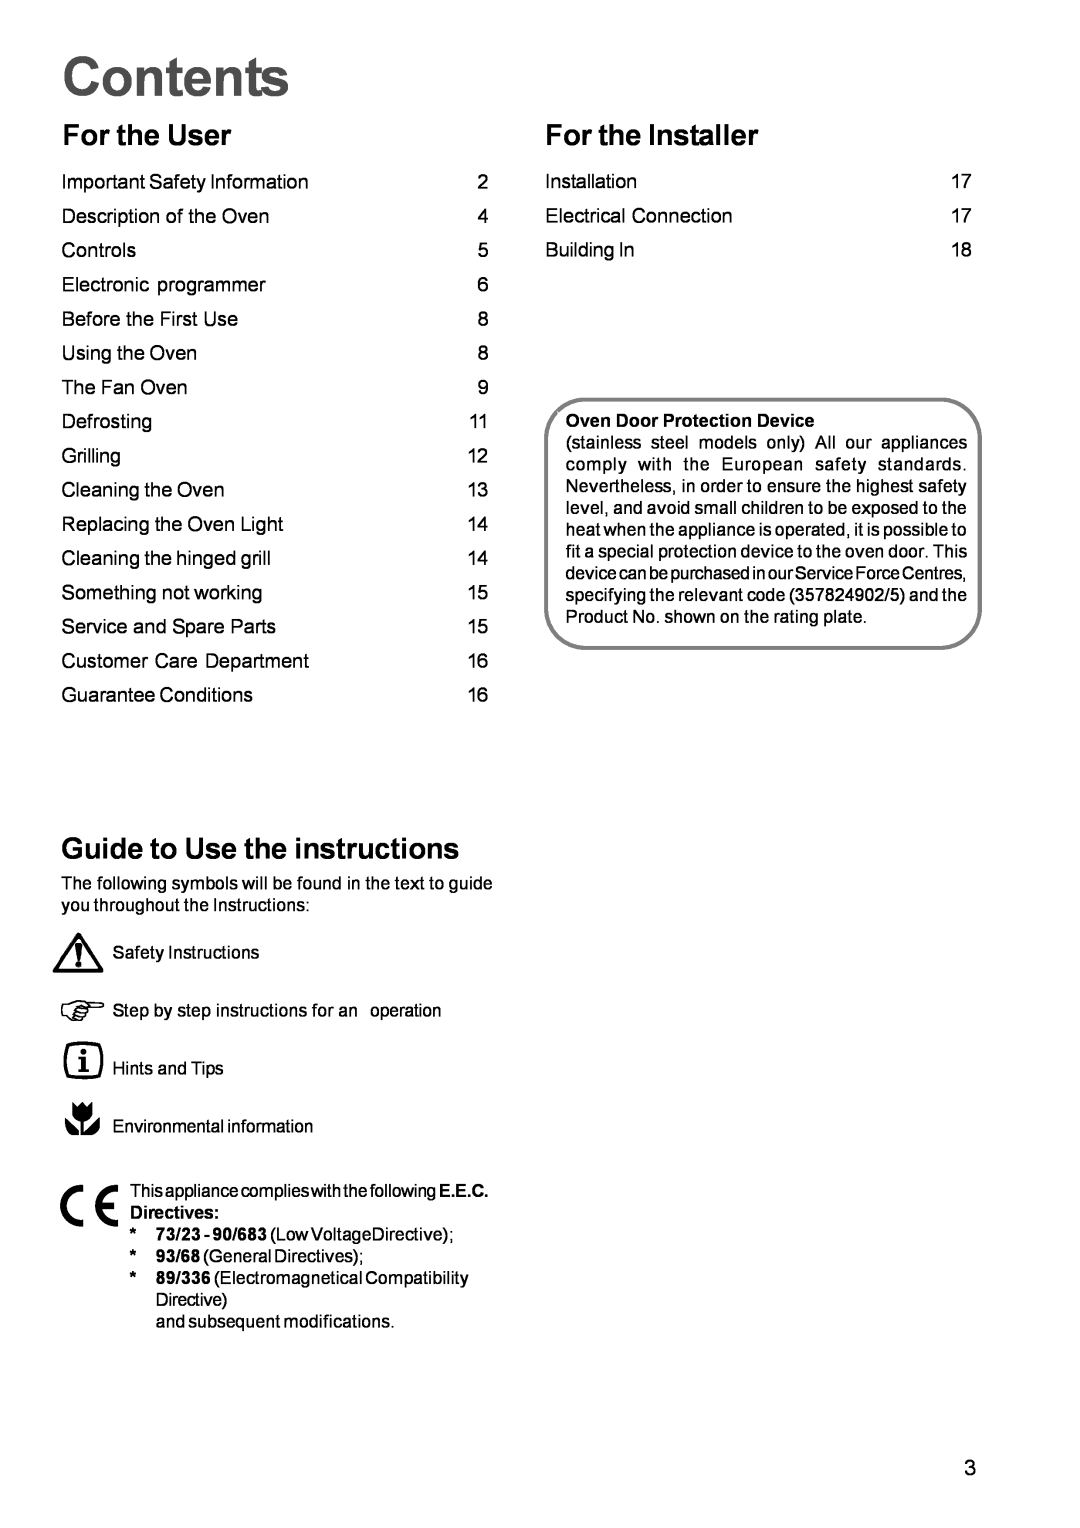 Zanussi ZBQ 365 manual Contents, For the User, For the Installer, Guide to Use the instructions 